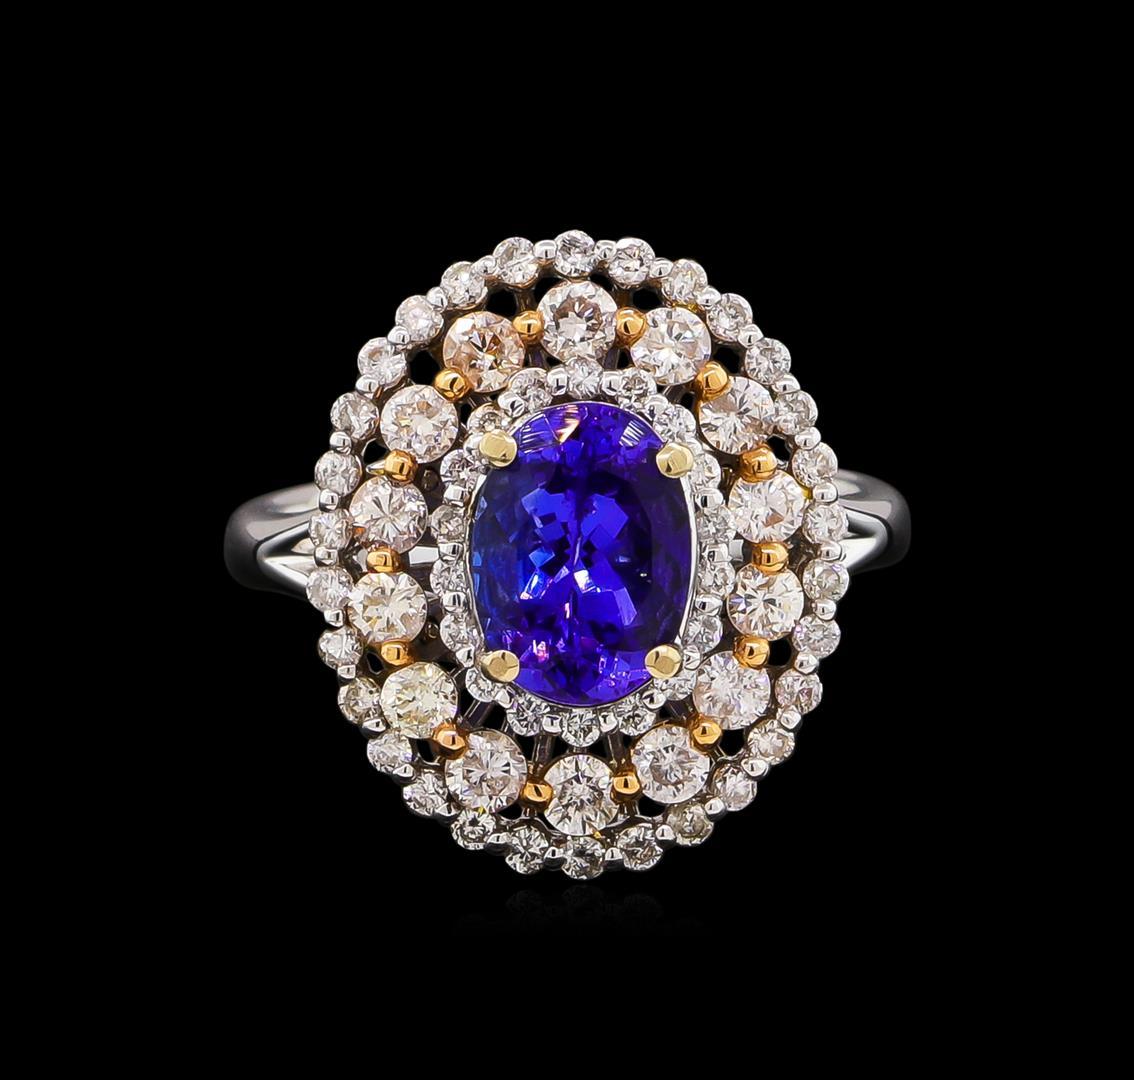 14KT Two-Tone Gold 1.73 ctw Tanzanite and Diamond Ring